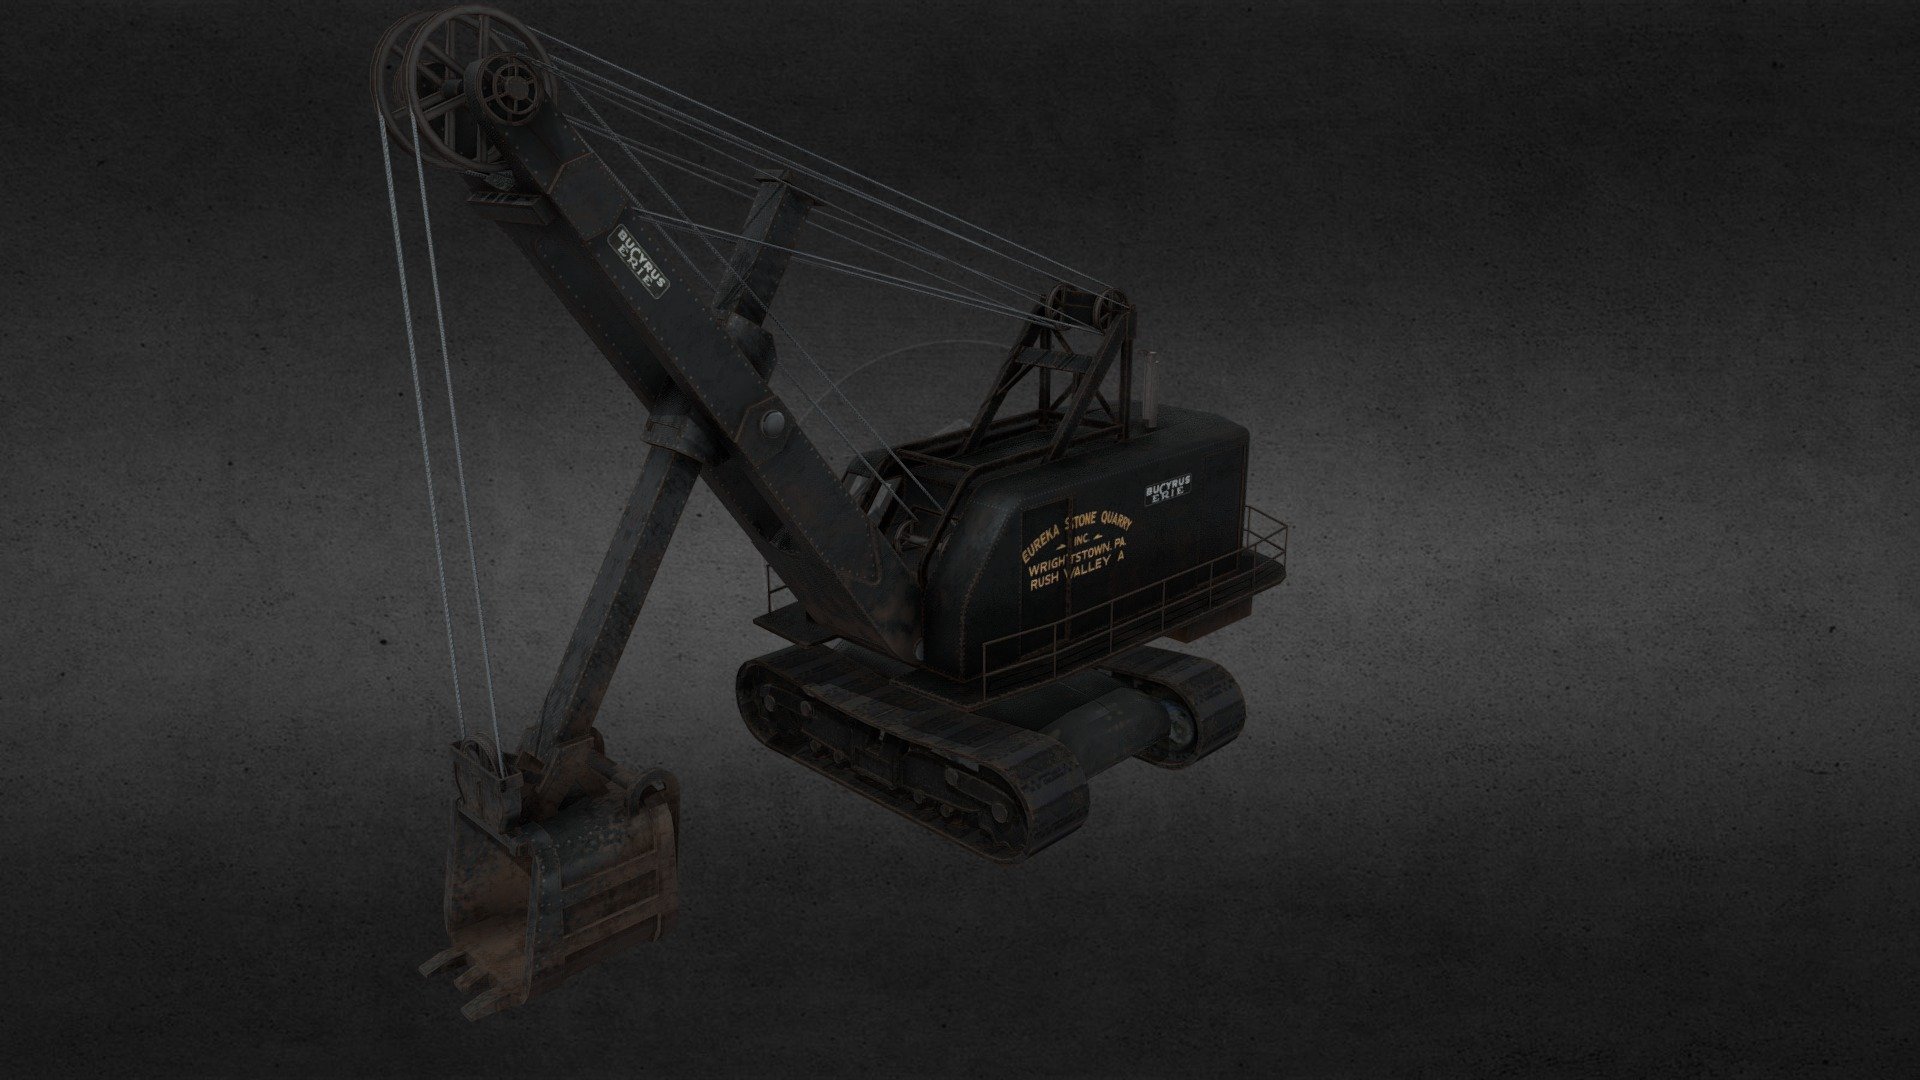 Relatively low-poly representation of real life shovel excavator Bucyrus Erie. Fully animated via one central armature. Full PBR textures include diffuse, metallic, roughness and normal maps raging in resolution from 1K up to 4K (depending on detail/importance) 3d model